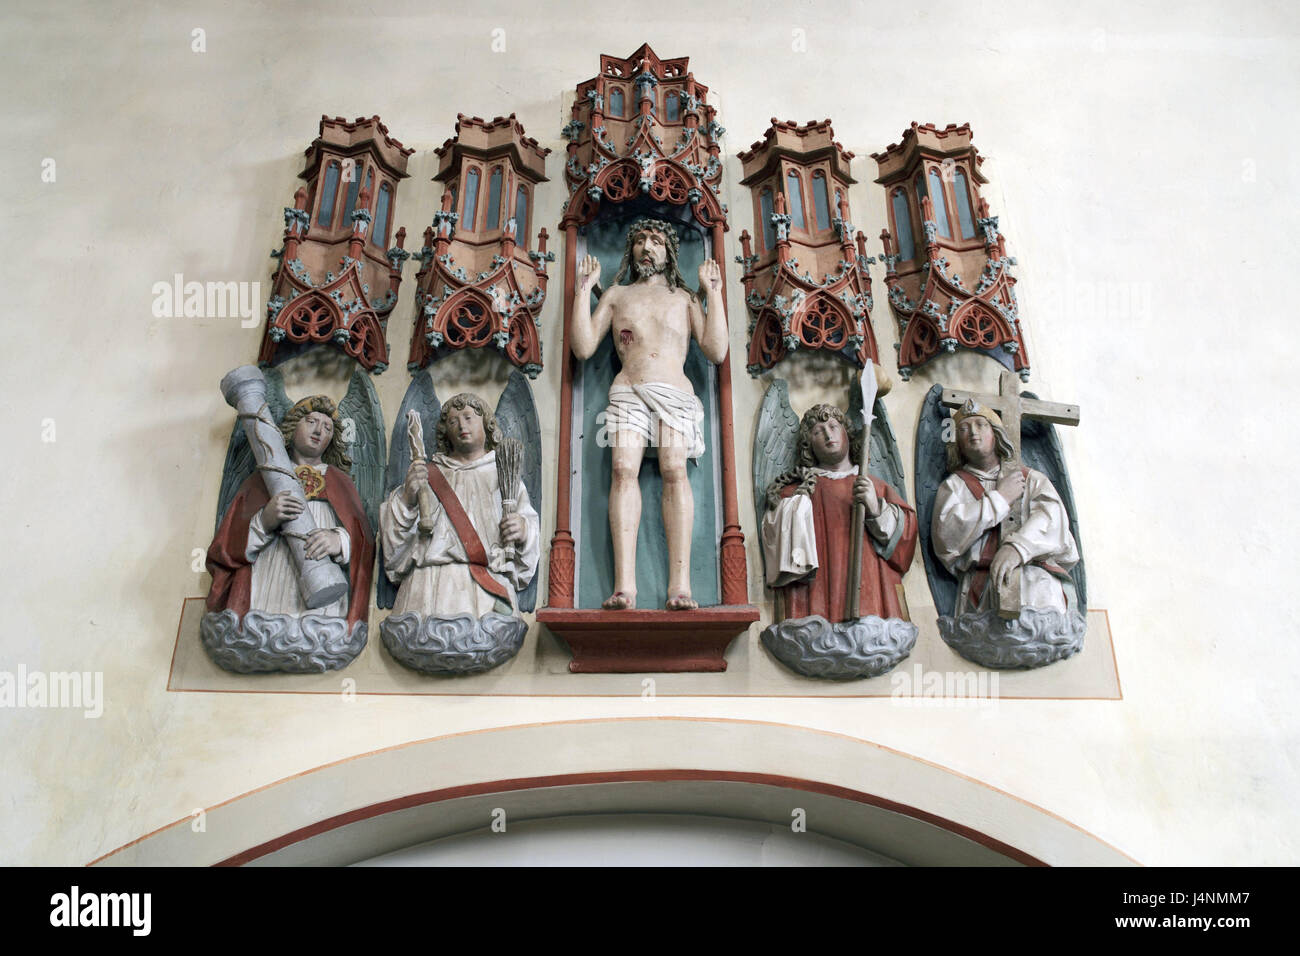 Germany, Rhineland-Palatinate, cathedral May field, church, figures of a saint, detail, May field, Eifel, Rhineland, the Palatinate, collegiate church, Gothic, architectural style, architecture, building, church, sacred construction, faith, religion, Christianity, characters, Jesus, Engel, ailment tools, sculptures, Schmerzensmann, Stock Photo